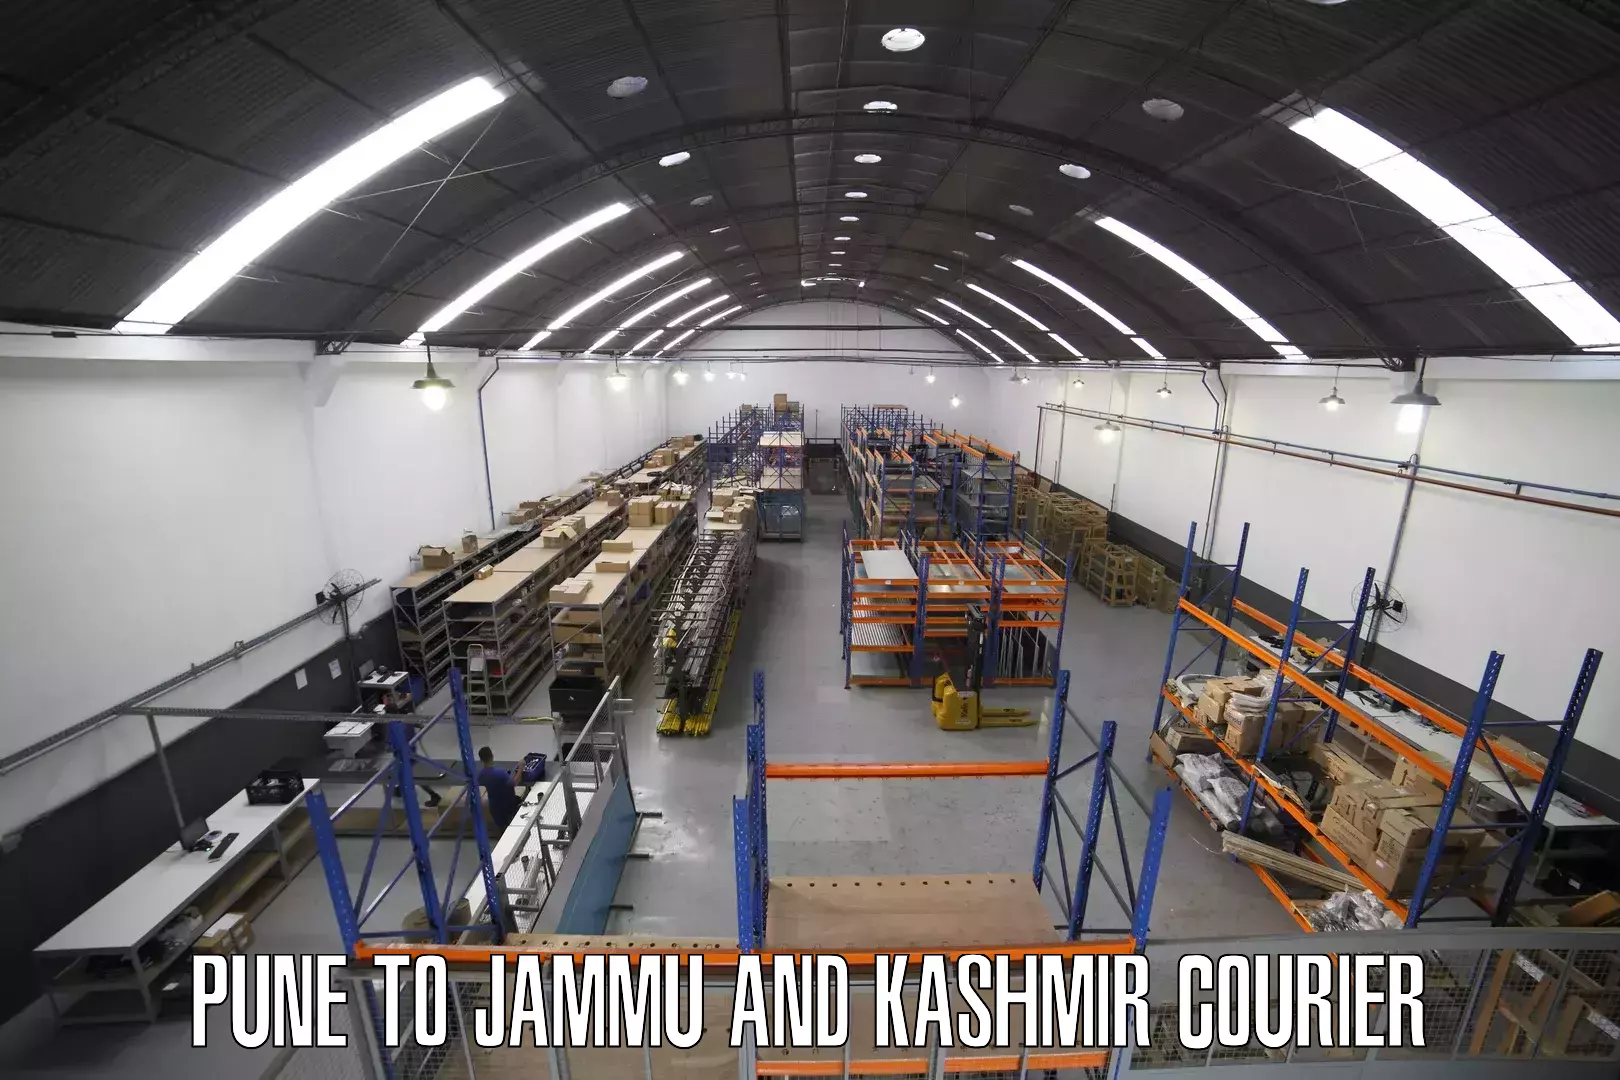 Pharmaceutical courier Pune to Jammu and Kashmir